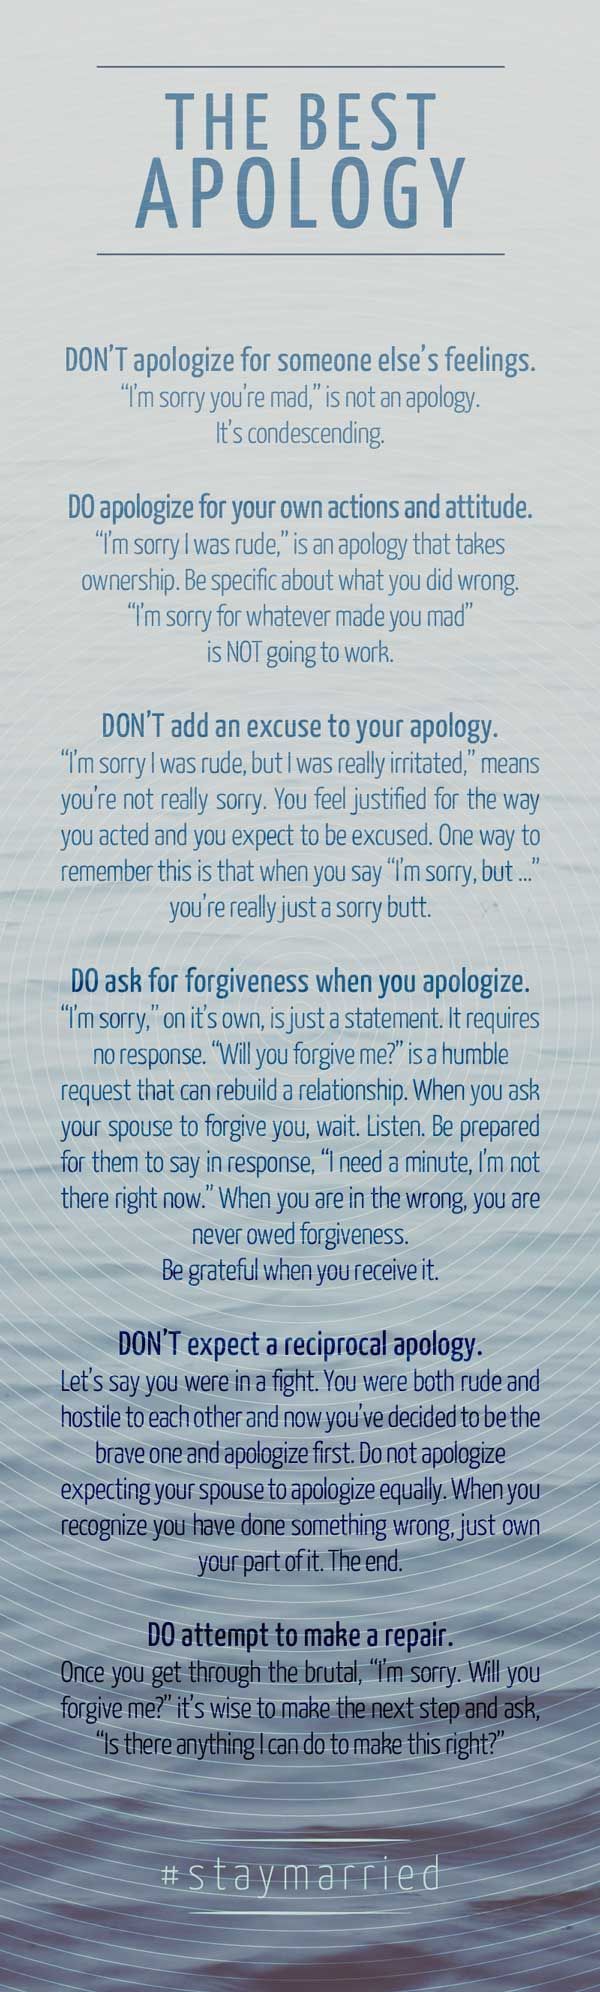 The Best Apology – How to say sorry like you mean it. #staymarried